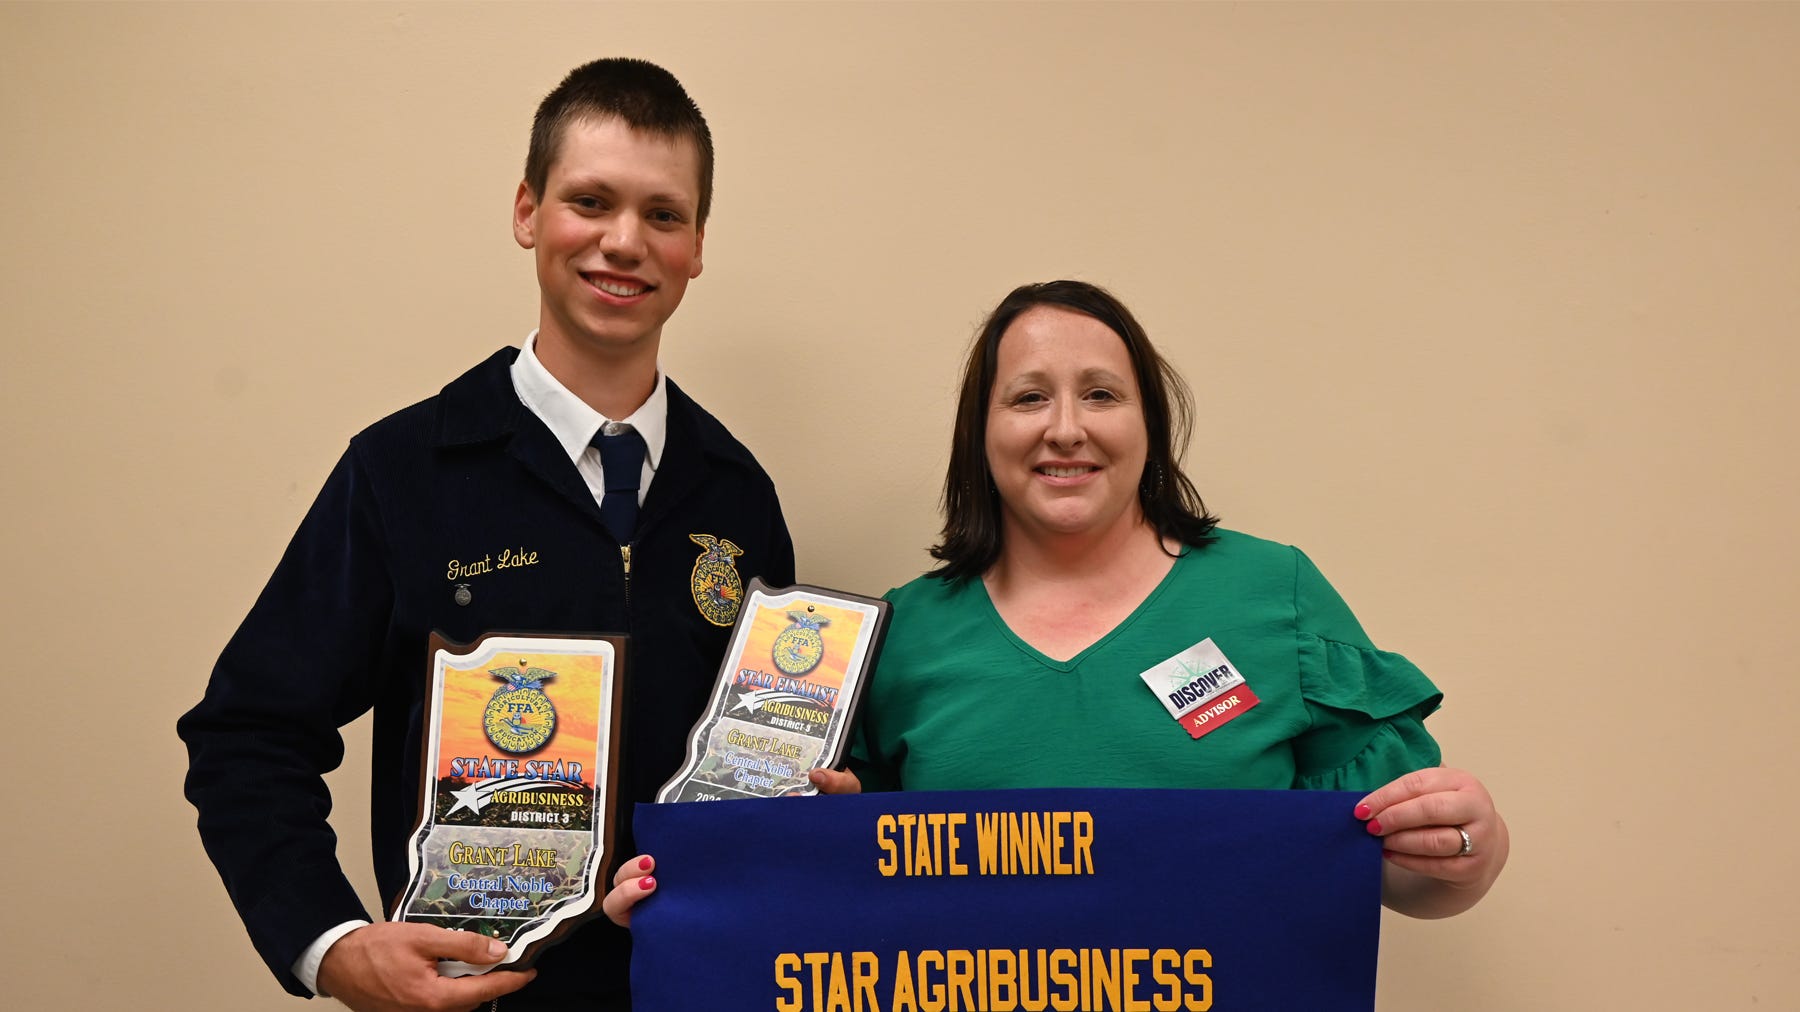 Grant Lake pictured with Central Noble FFA Advisor Jamie Earnhart